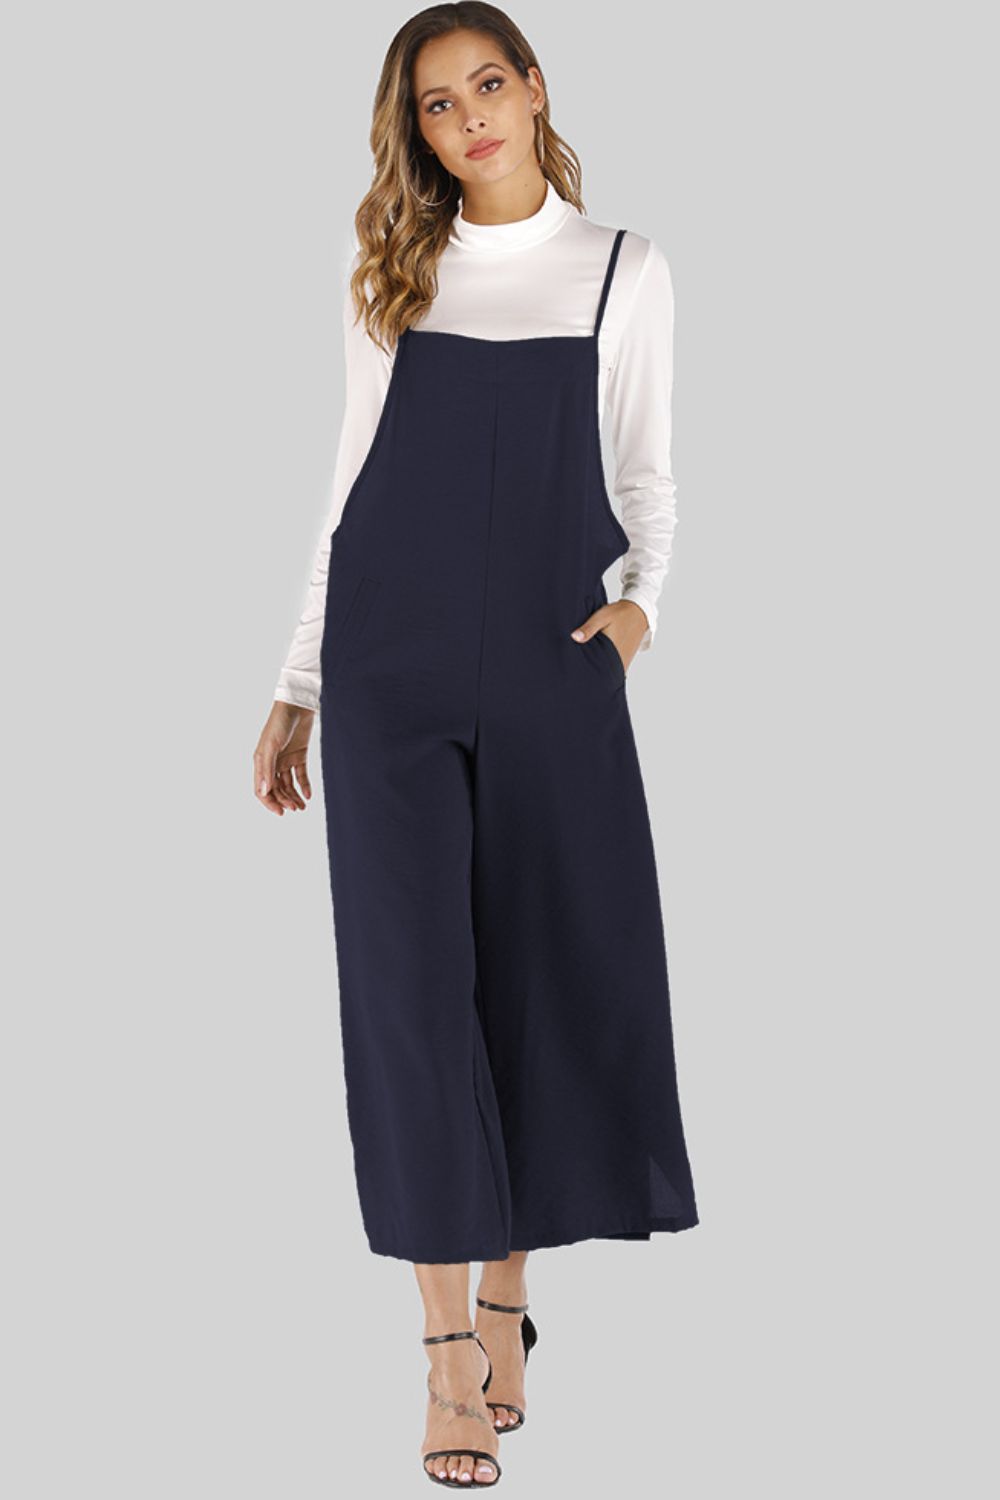 Full Size Cropped Wide Leg Overalls with Pockets - Dark Blue / S - Bottoms - Overalls - 9 - 2024